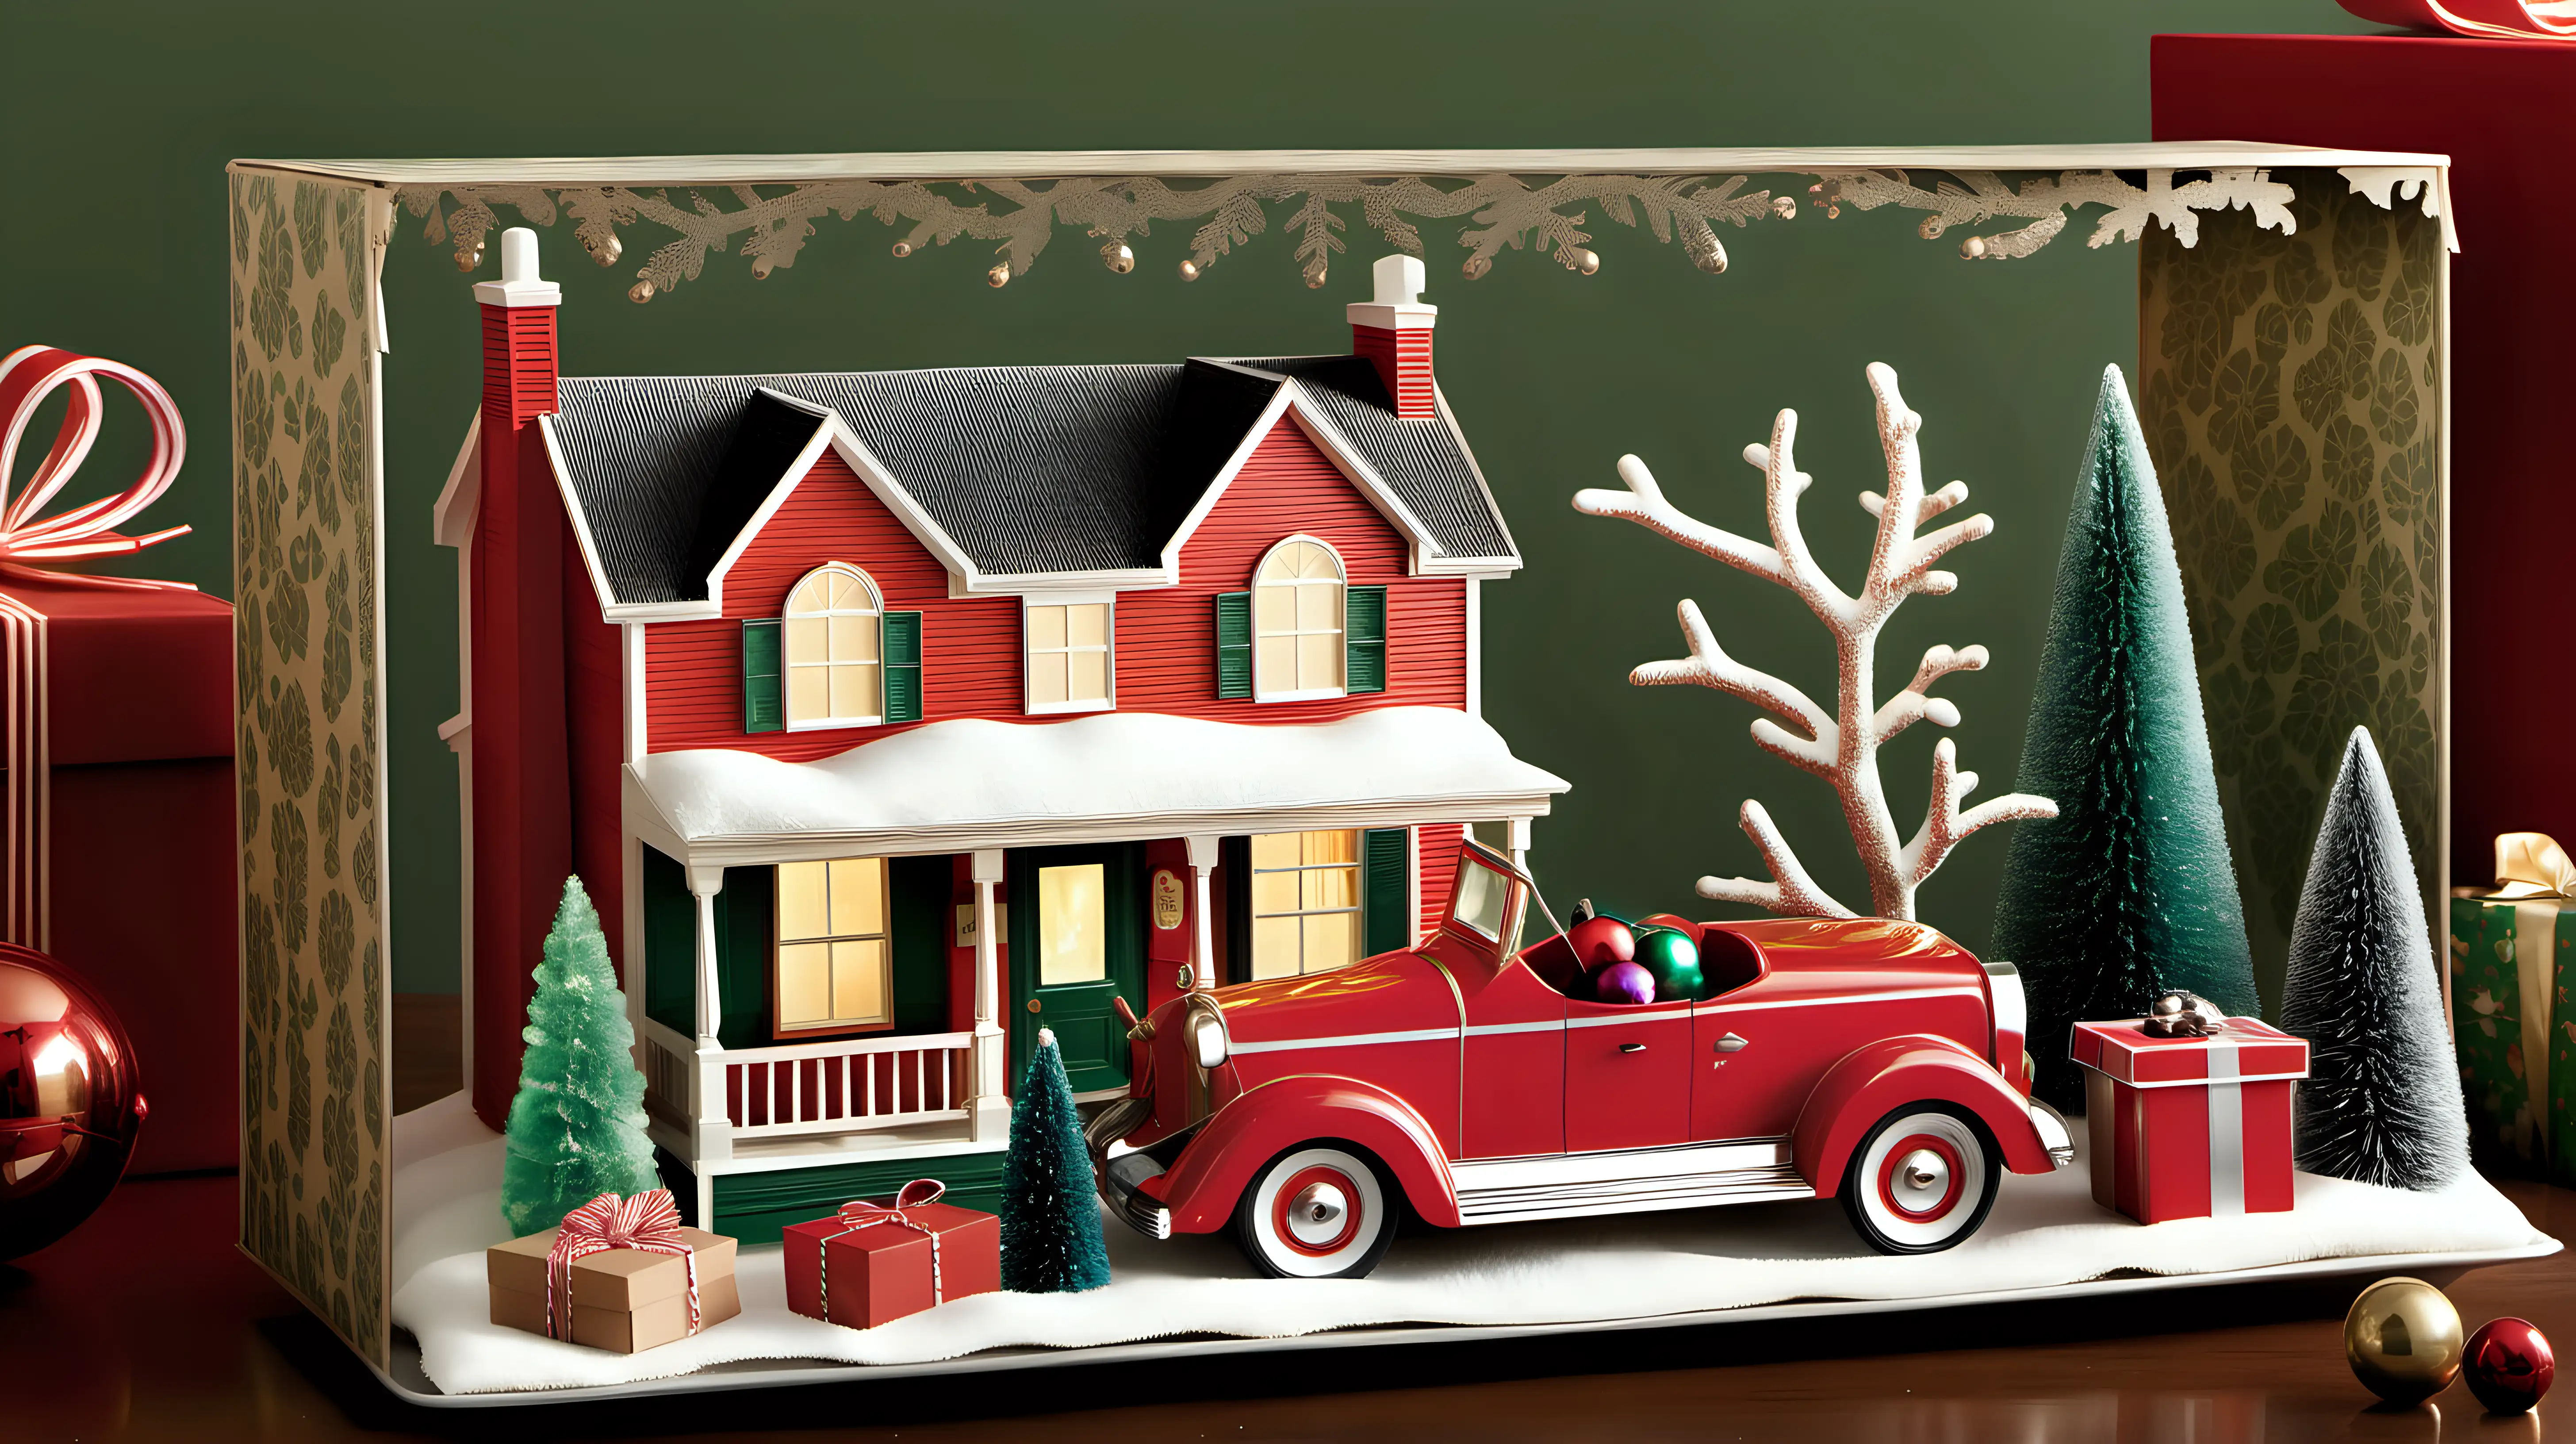 "Illustrate the nostalgia of Christmas with a vintage-inspired scene featuring classic toys and trinkets."